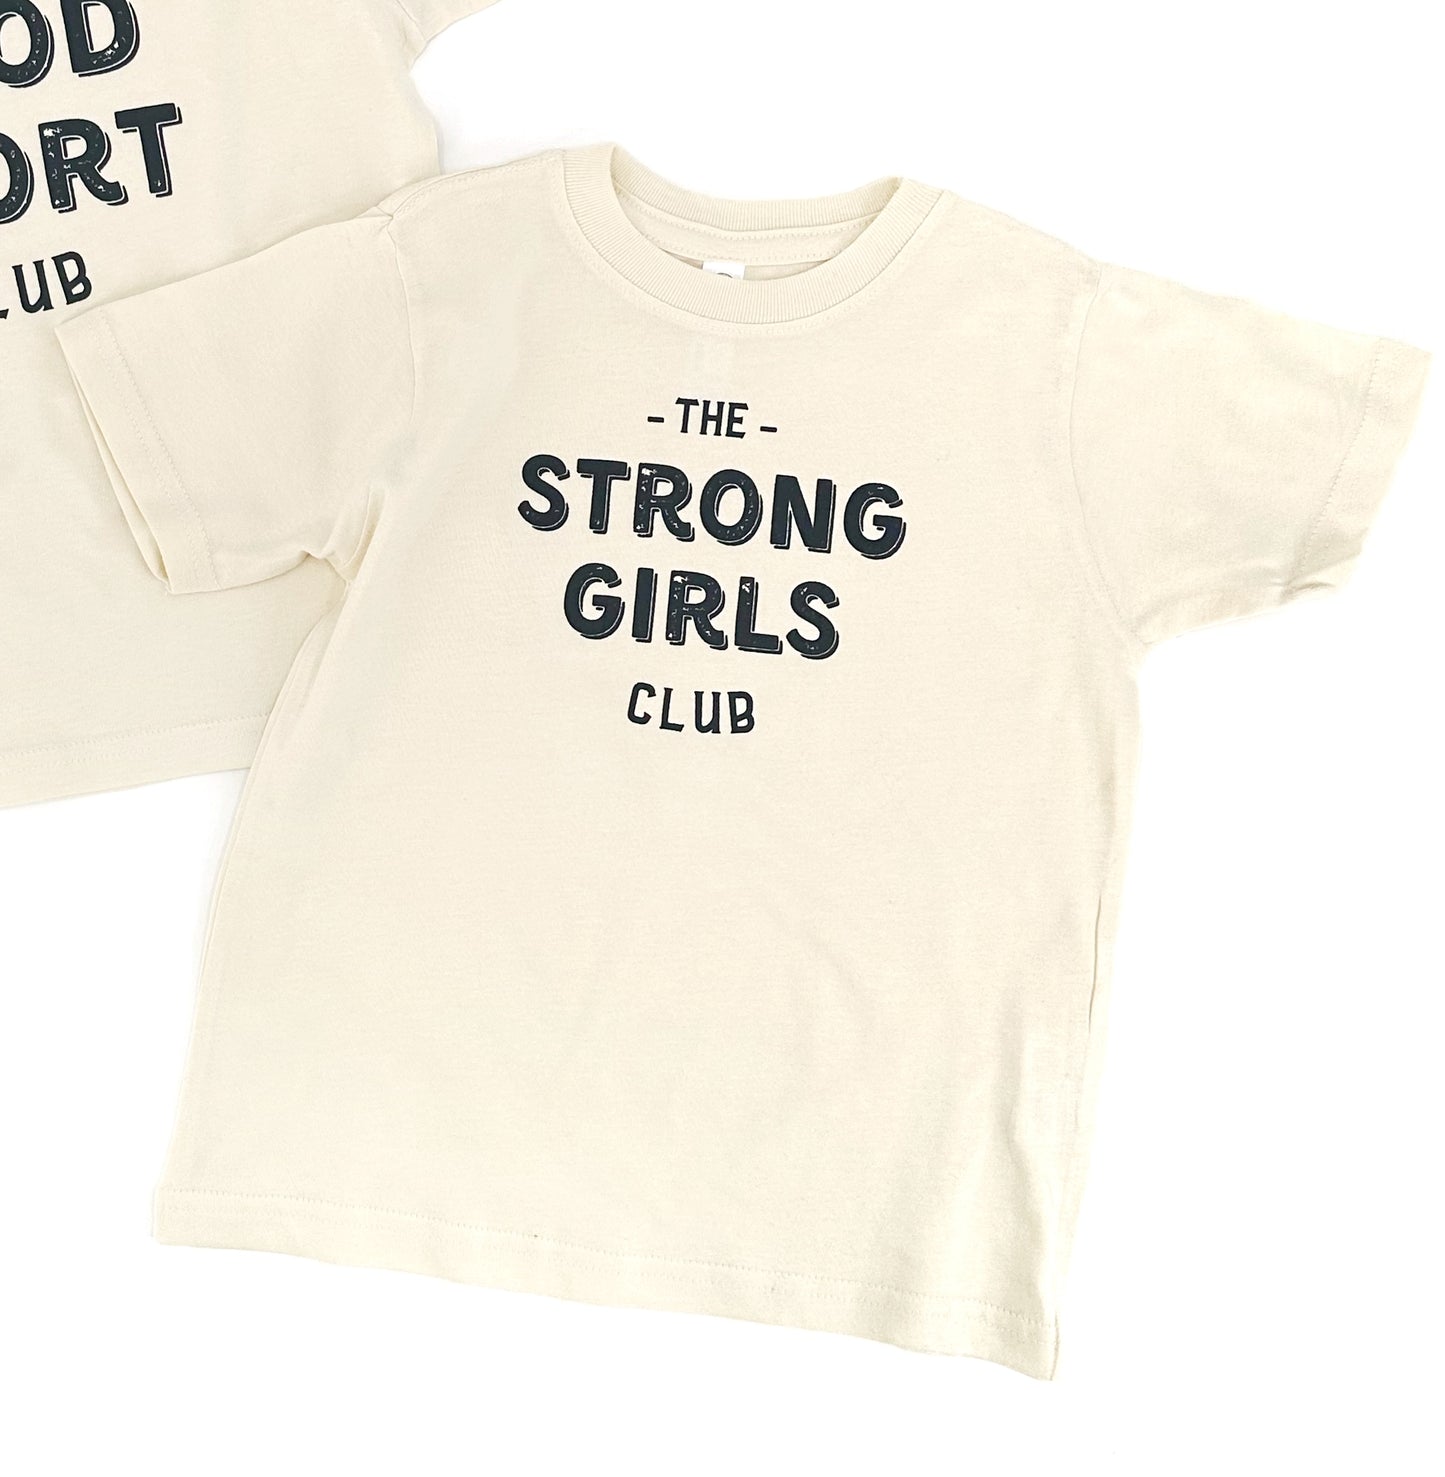 The Strong Girls Club